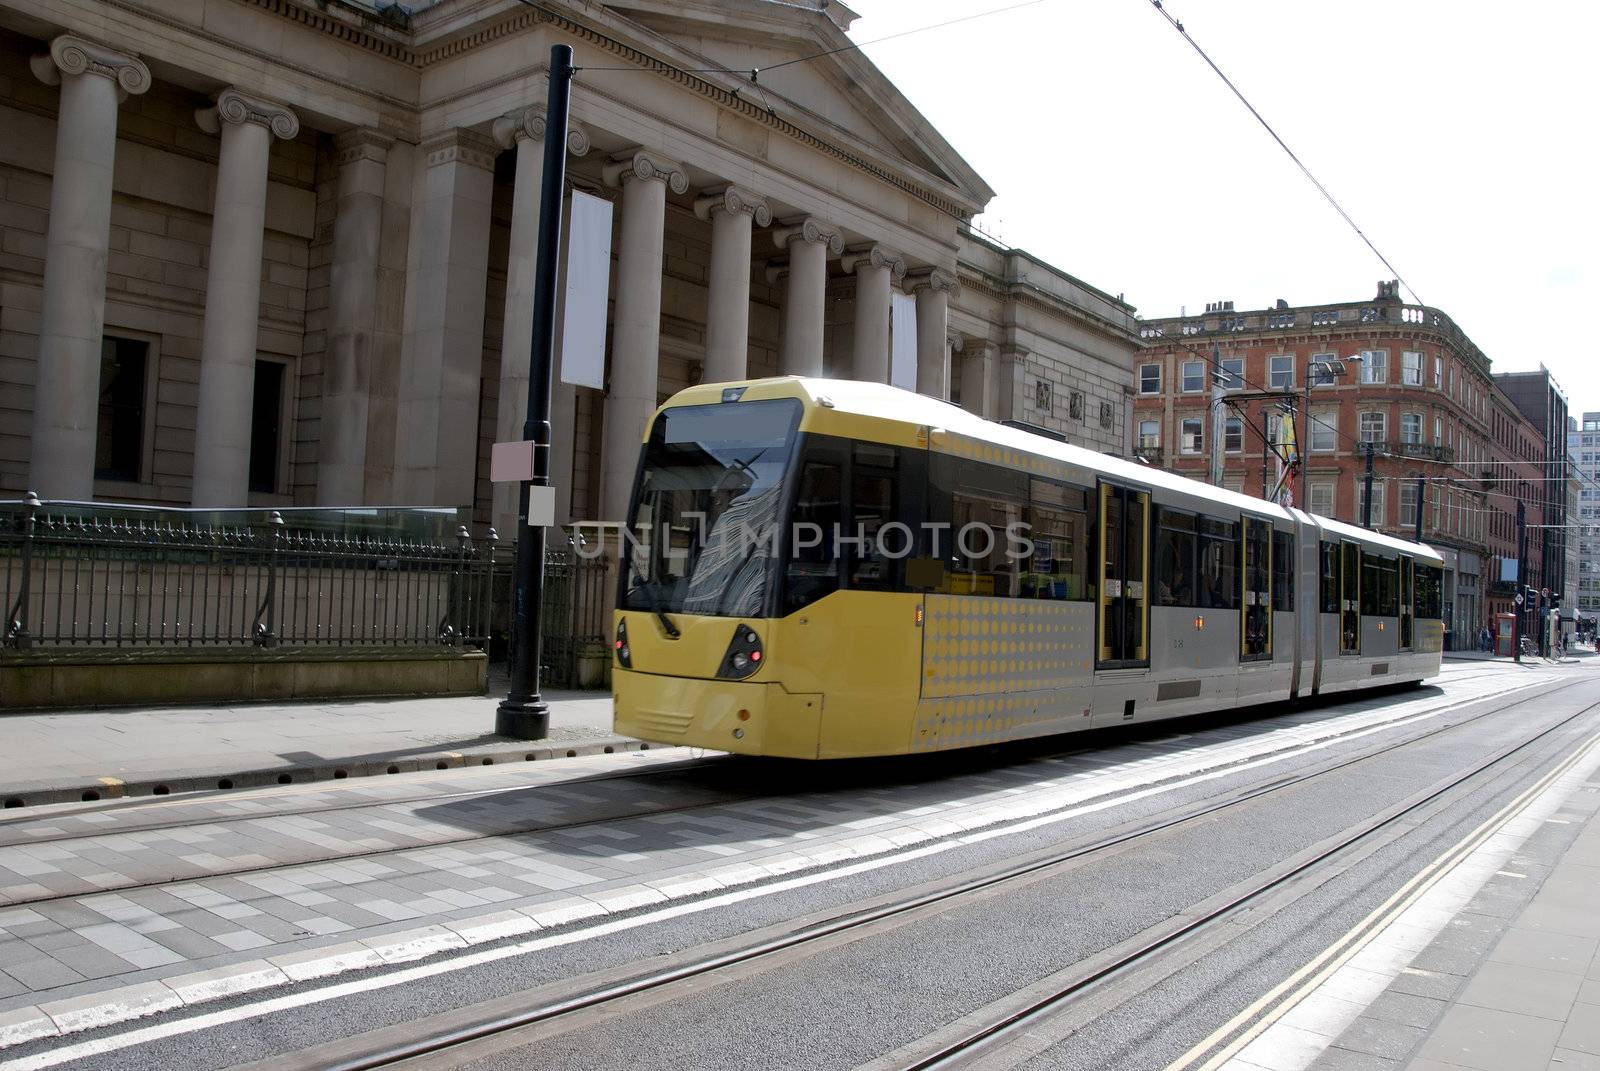 A Modern Yellow Tramcar passing an old Art Gallery in a city street